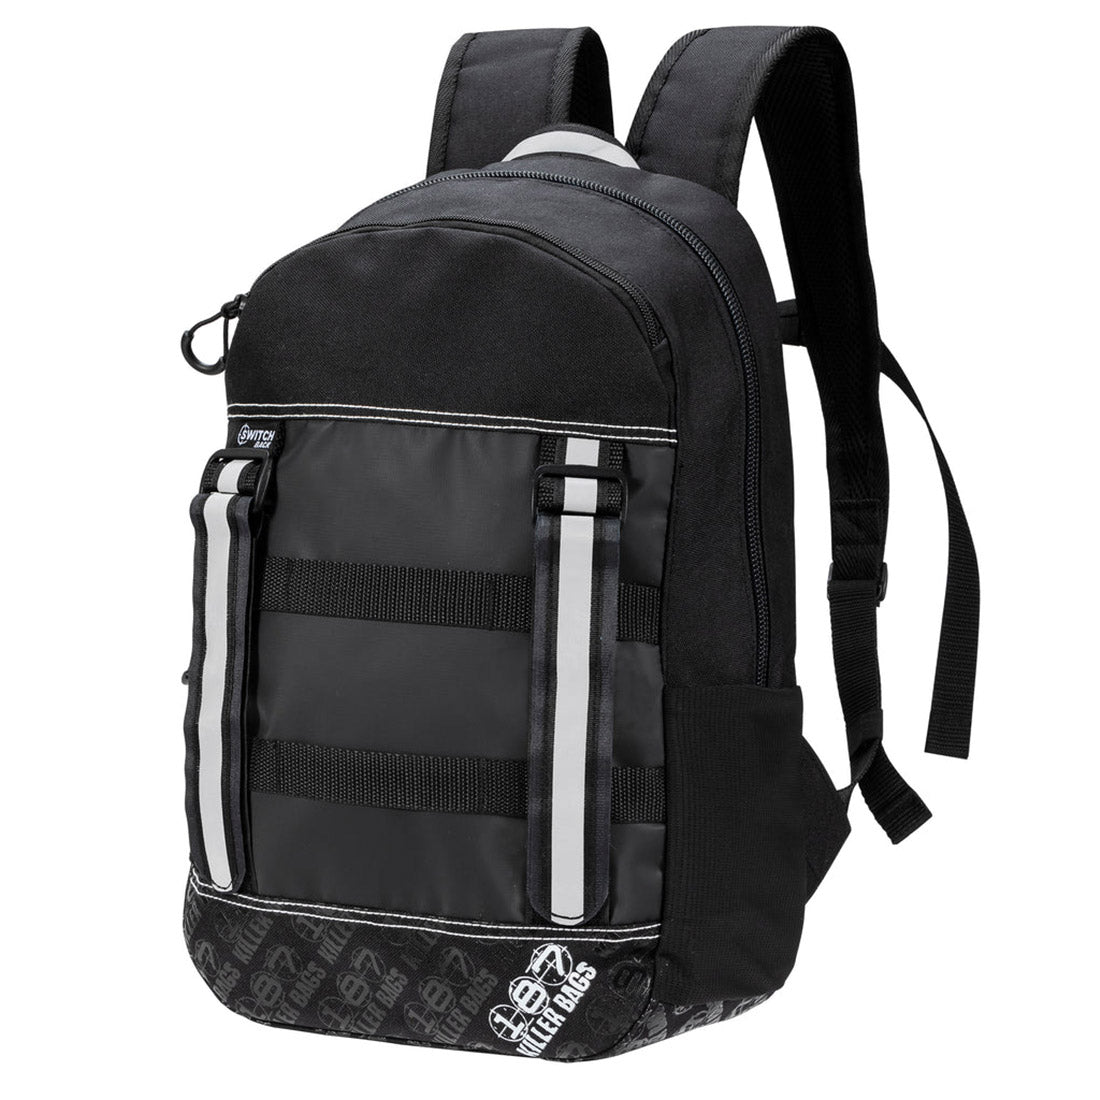 187 Killer Switch Backpack - Black Bags and Backpacks